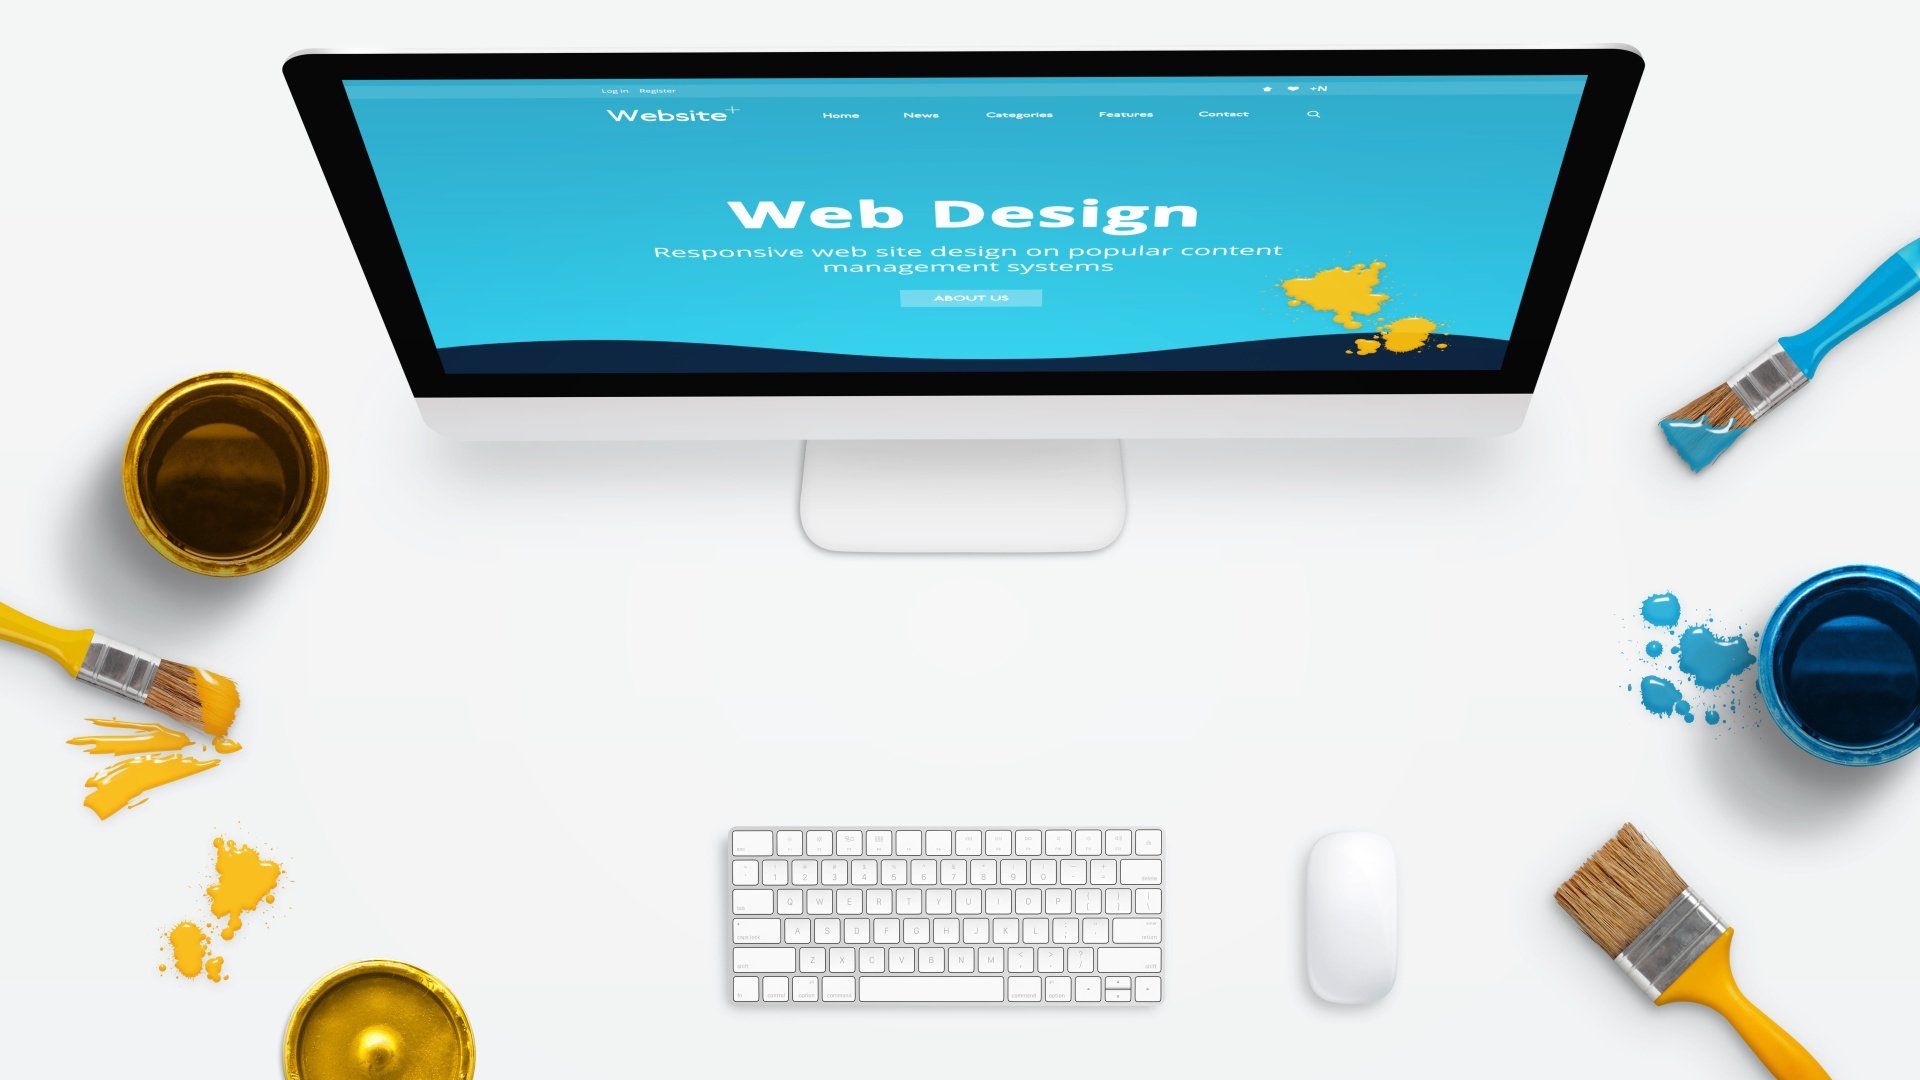 The Rising Web Design Trends for 2022 | What to Look Out For